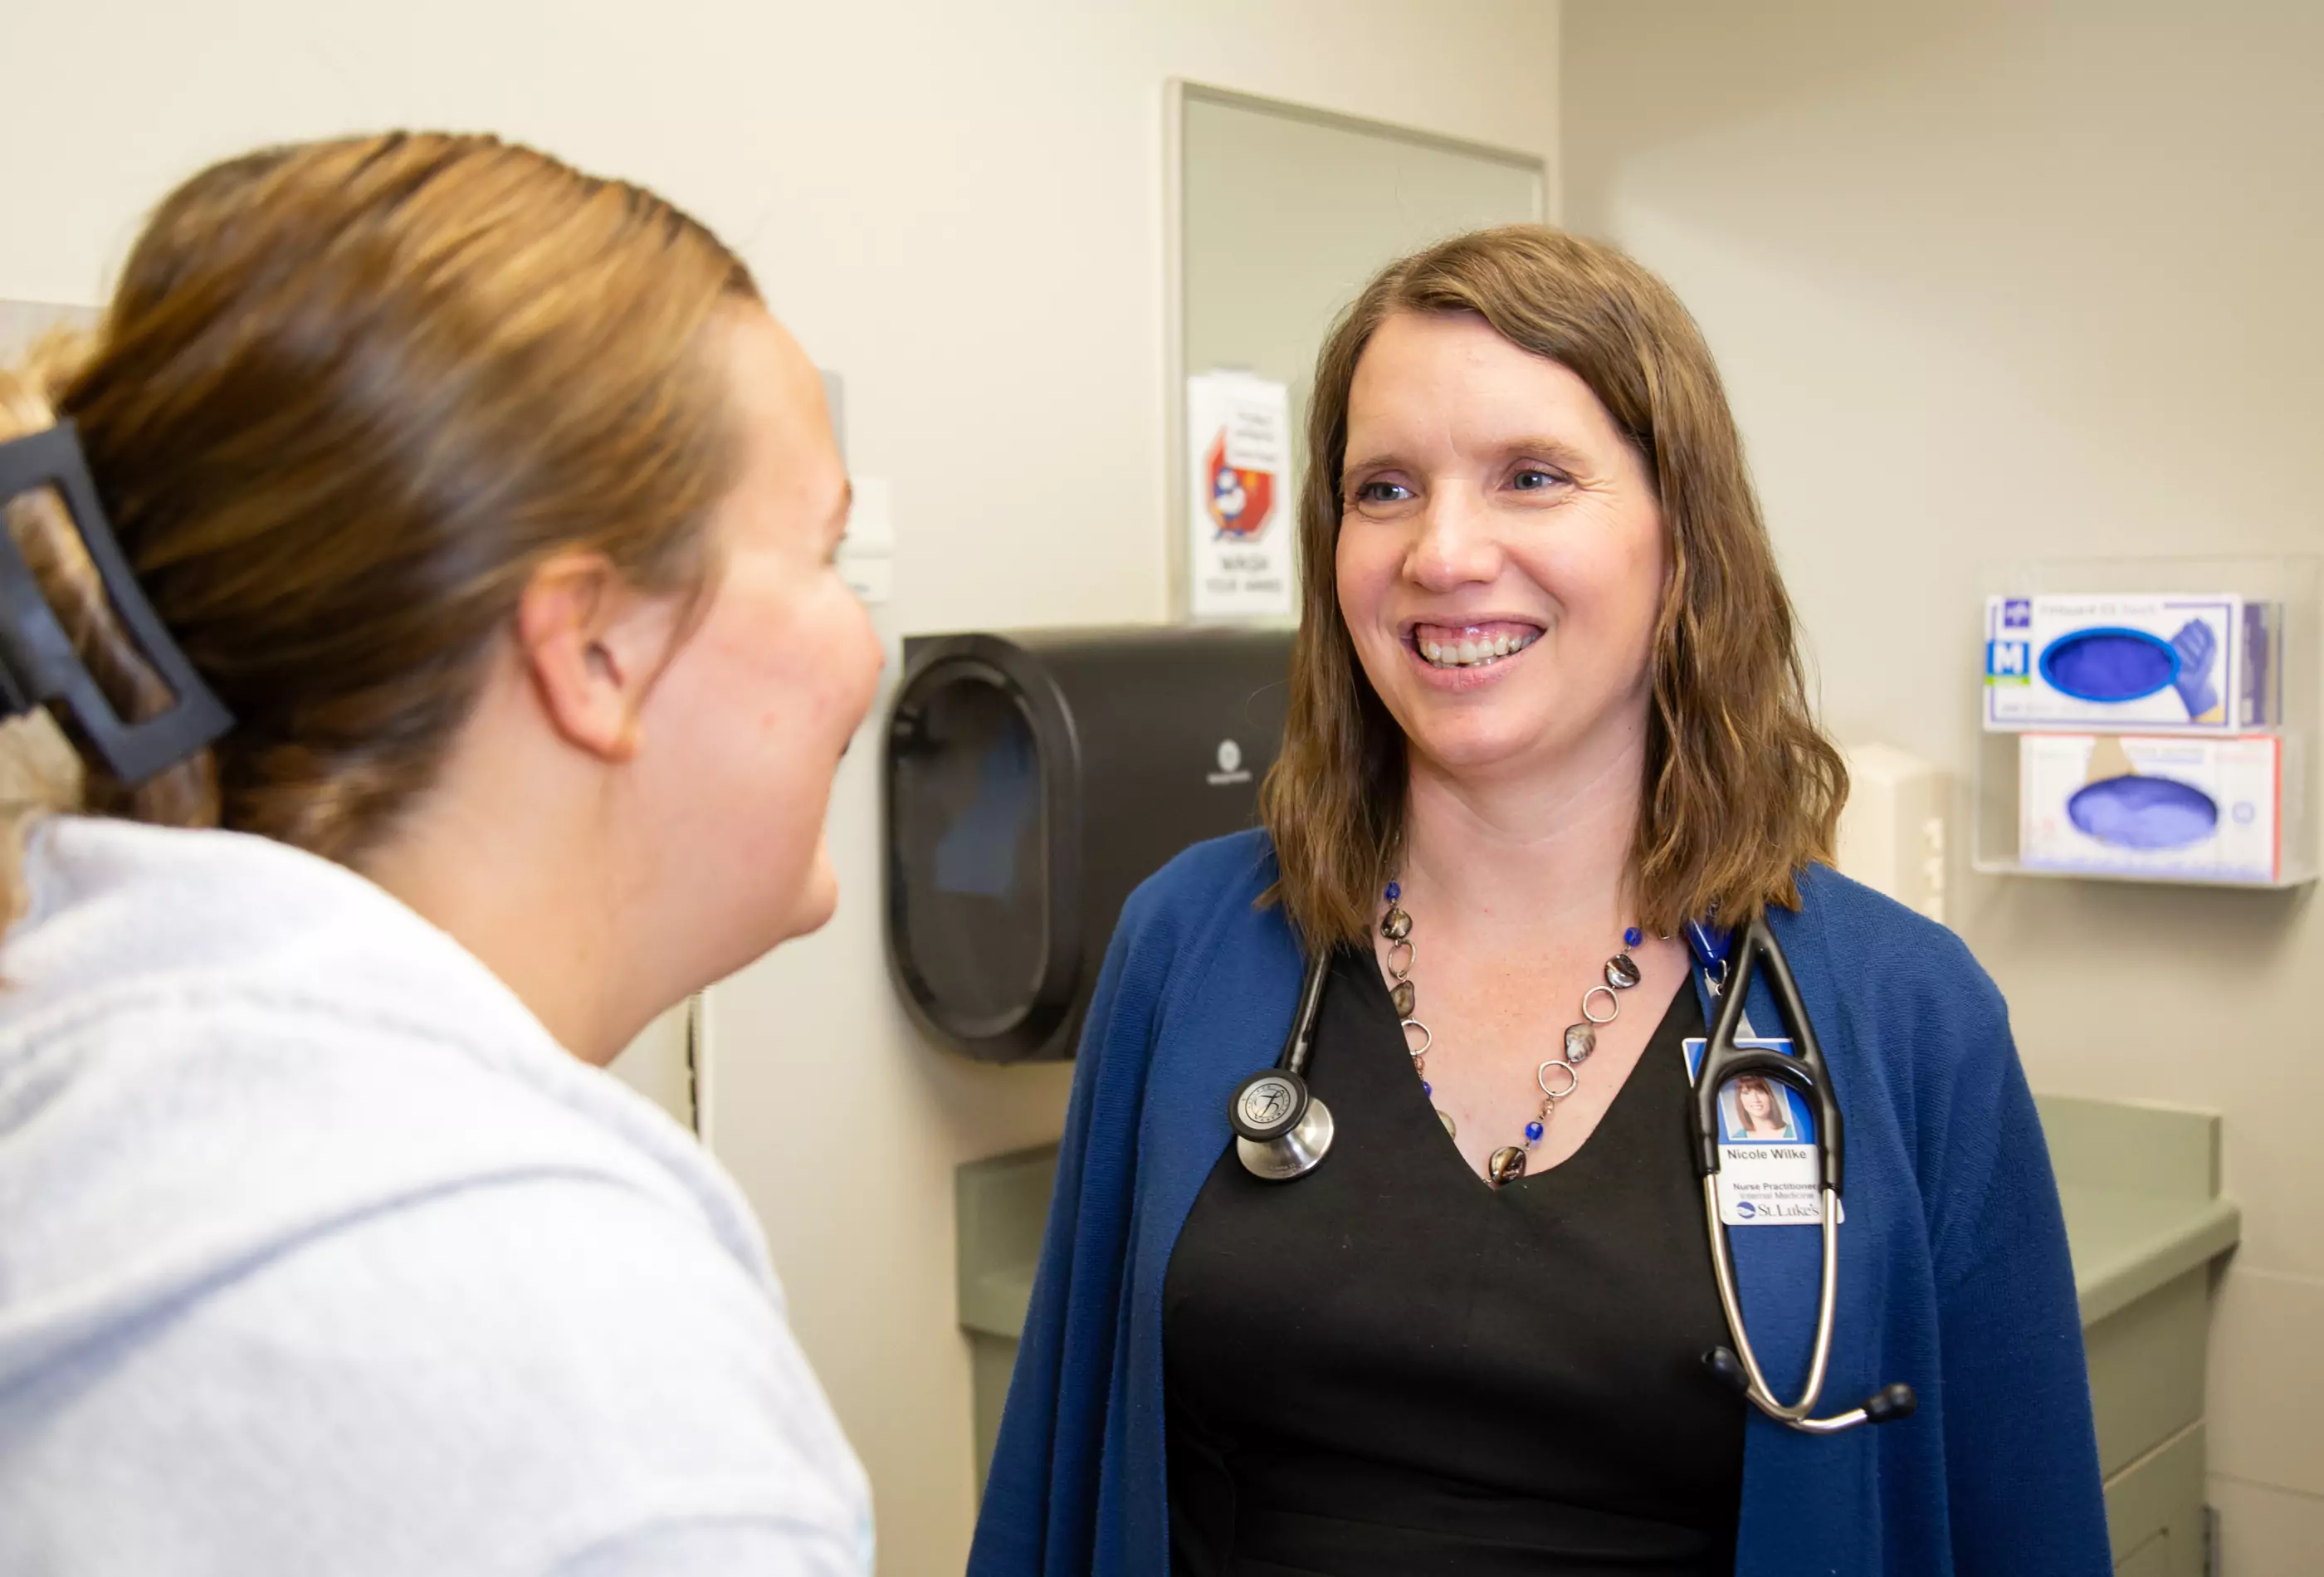 An internal medicine nurse practitioner smiling at a young female patient.